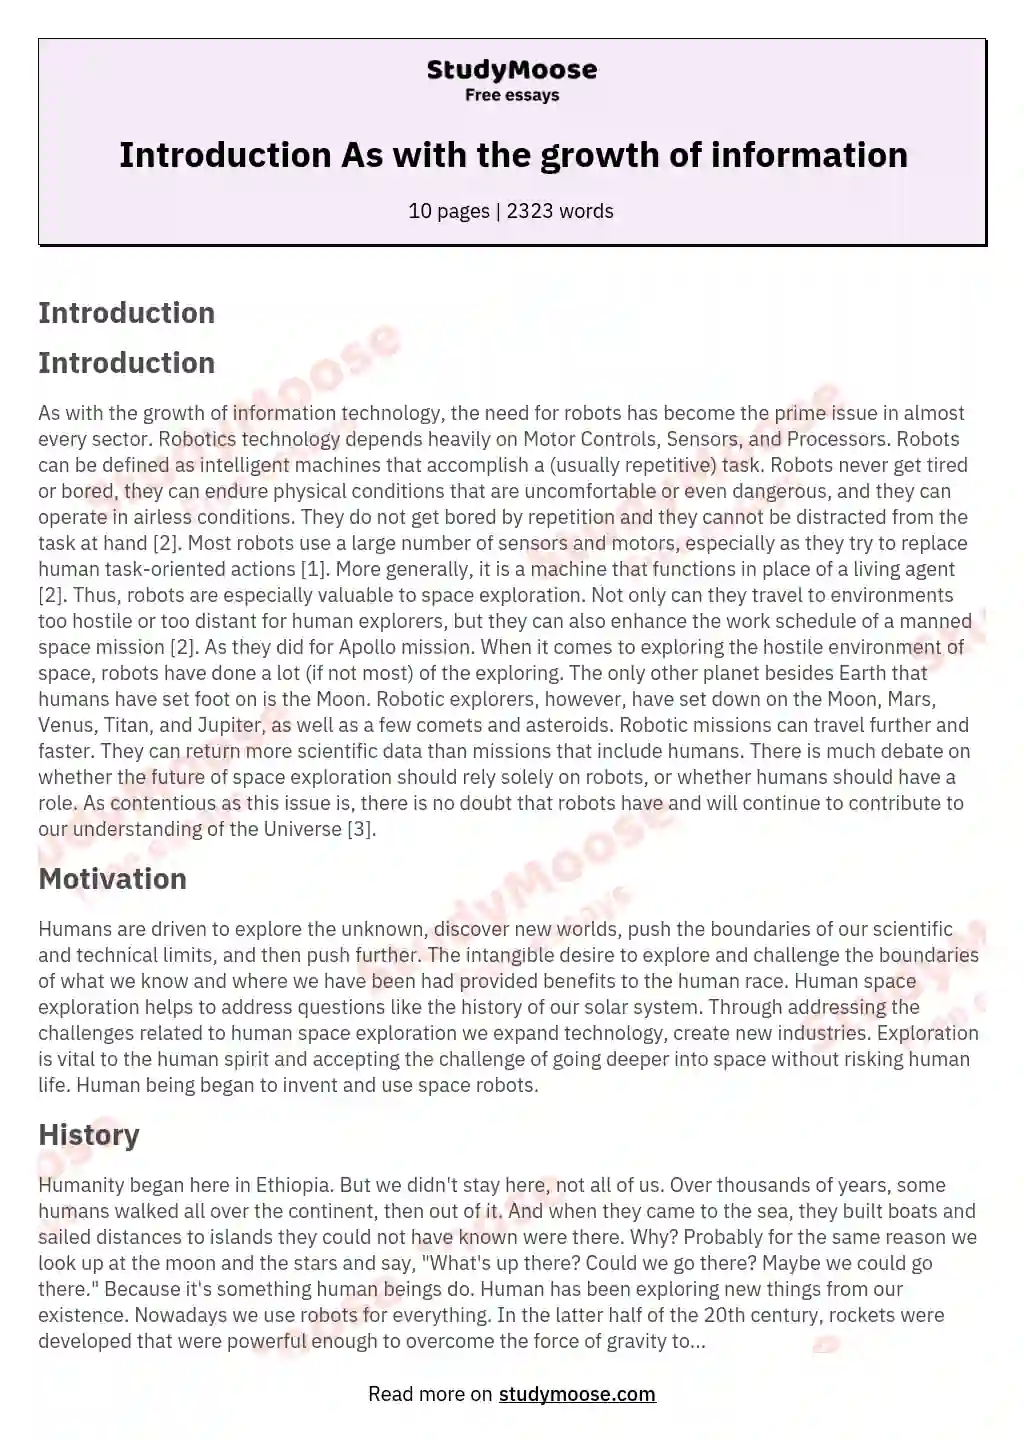 Introduction As with the growth of information essay